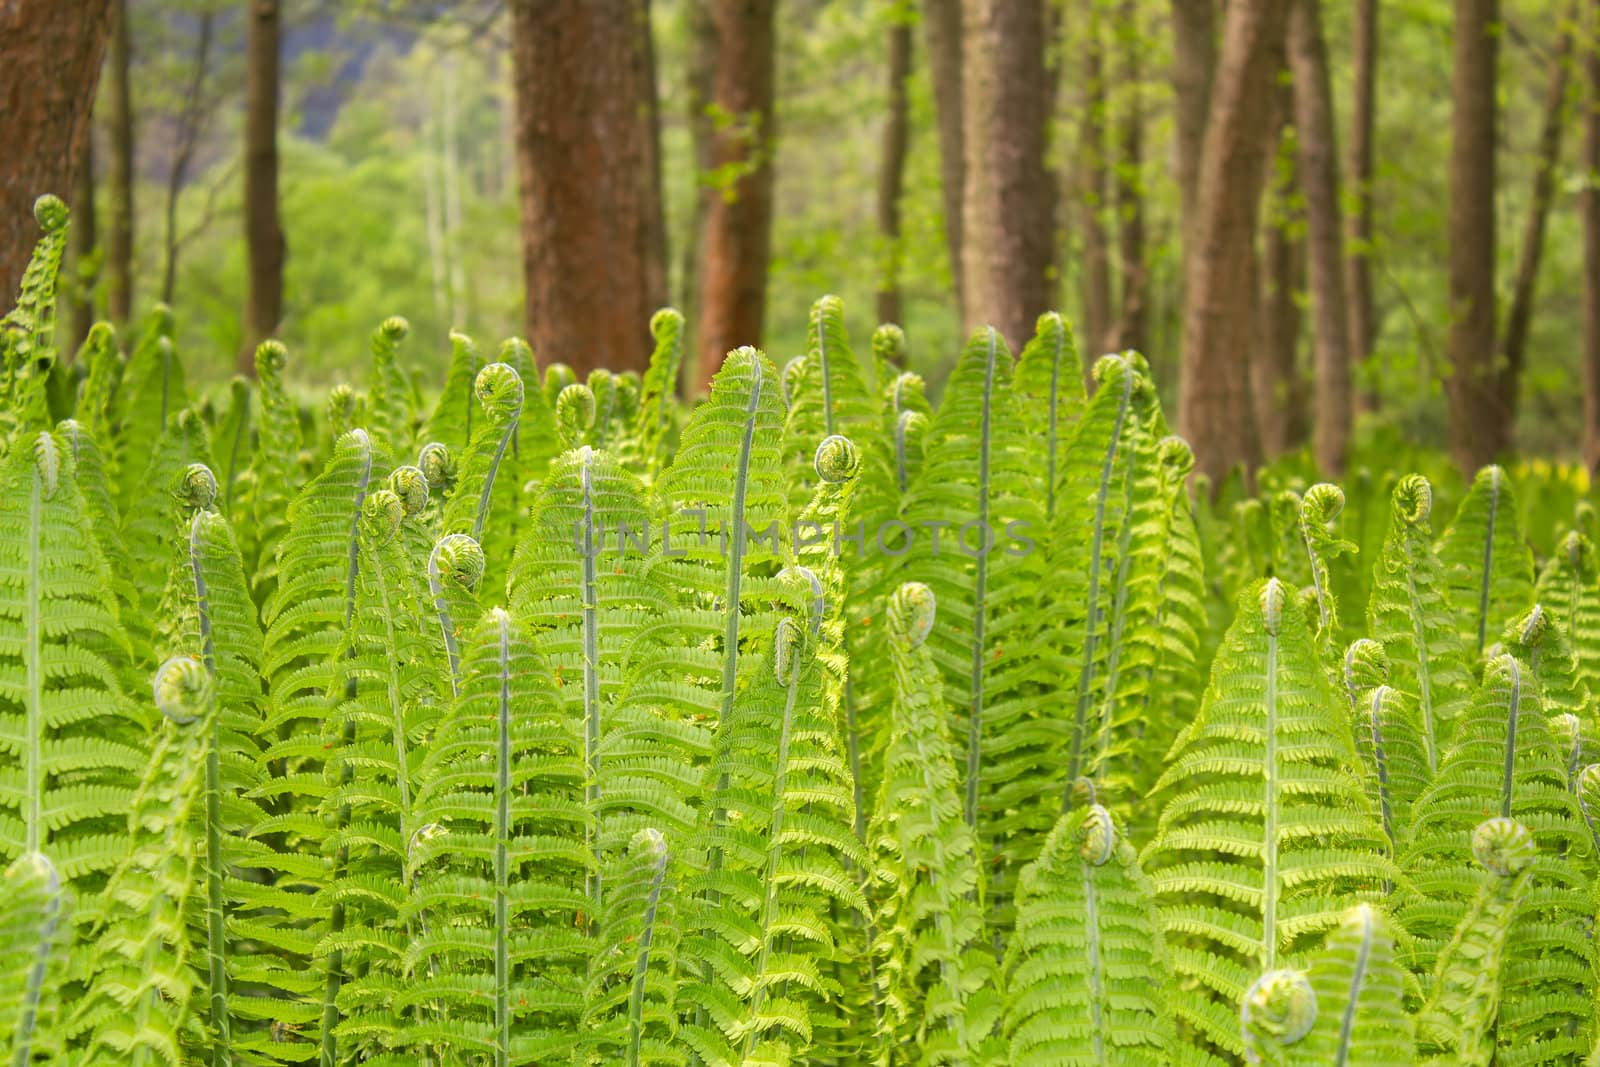 Closeup of a Green Fern in the Forest